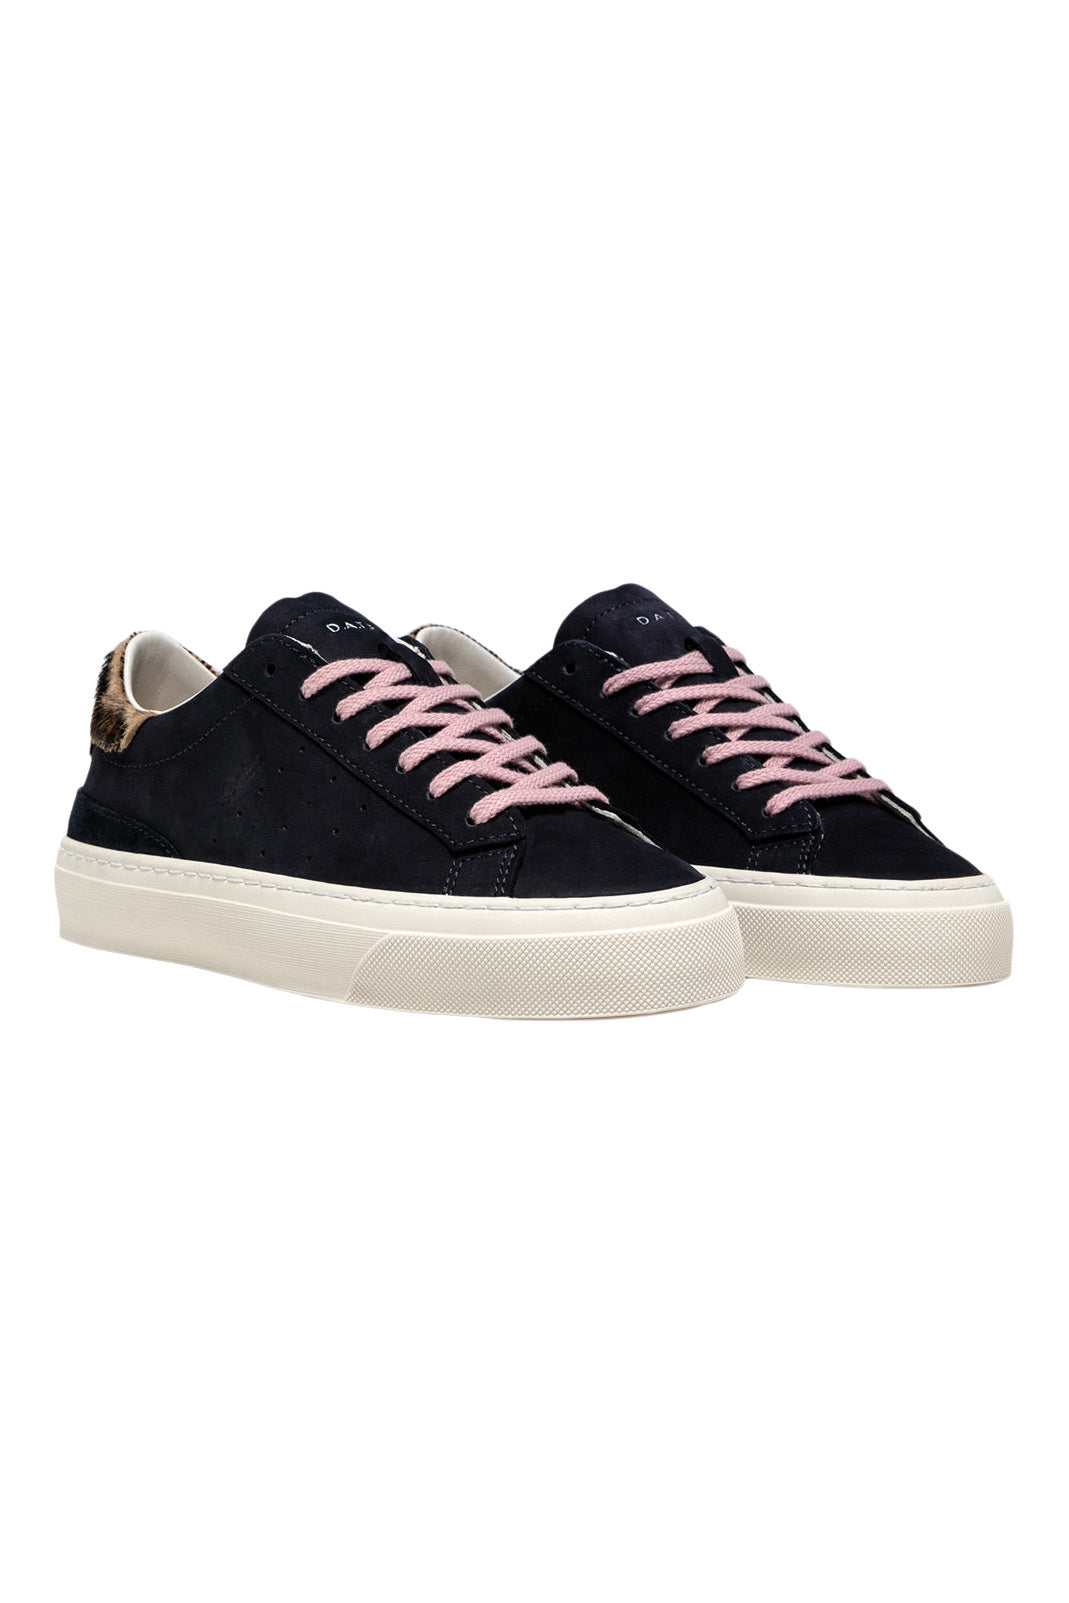 D.A.T.E Sonica Leather Sneakers in Navy Blue